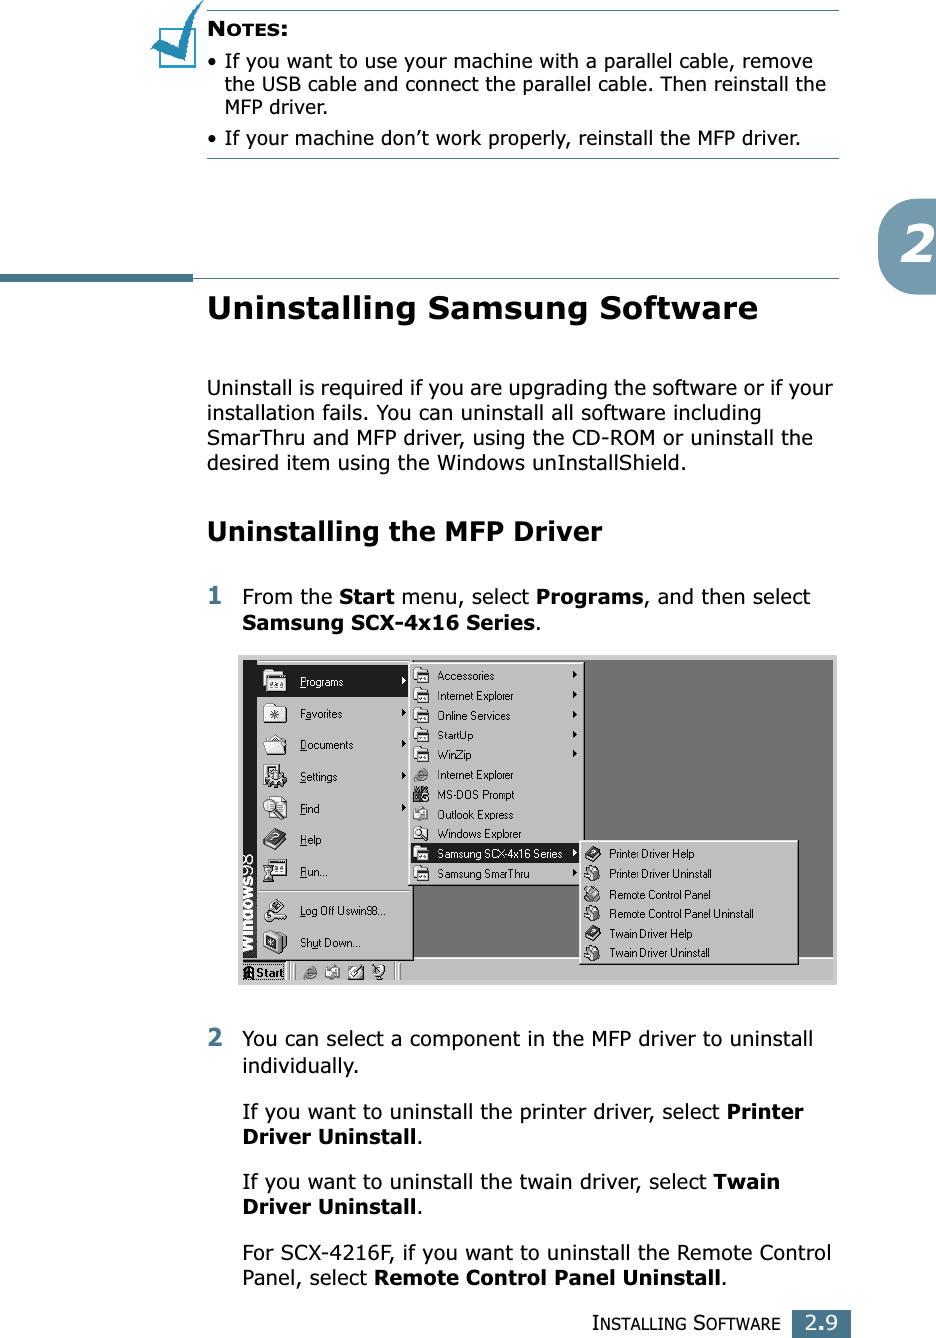 INSTALLING SOFTWARE2.92NOTES:• If you want to use your machine with a parallel cable, remove the USB cable and connect the parallel cable. Then reinstall the MFP driver. • If your machine don’t work properly, reinstall the MFP driver.Uninstalling Samsung SoftwareUninstall is required if you are upgrading the software or if your installation fails. You can uninstall all software including SmarThru and MFP driver, using the CD-ROM or uninstall the desired item using the Windows unInstallShield.Uninstalling the MFP Driver1From the Start menu, select Programs, and then select Samsung SCX-4x16 Series.2You can select a component in the MFP driver to uninstall individually.If you want to uninstall the printer driver, select Printer Driver Uninstall.If you want to uninstall the twain driver, select Twain Driver Uninstall. For SCX-4216F, if you want to uninstall the Remote Control Panel, select Remote Control Panel Uninstall.